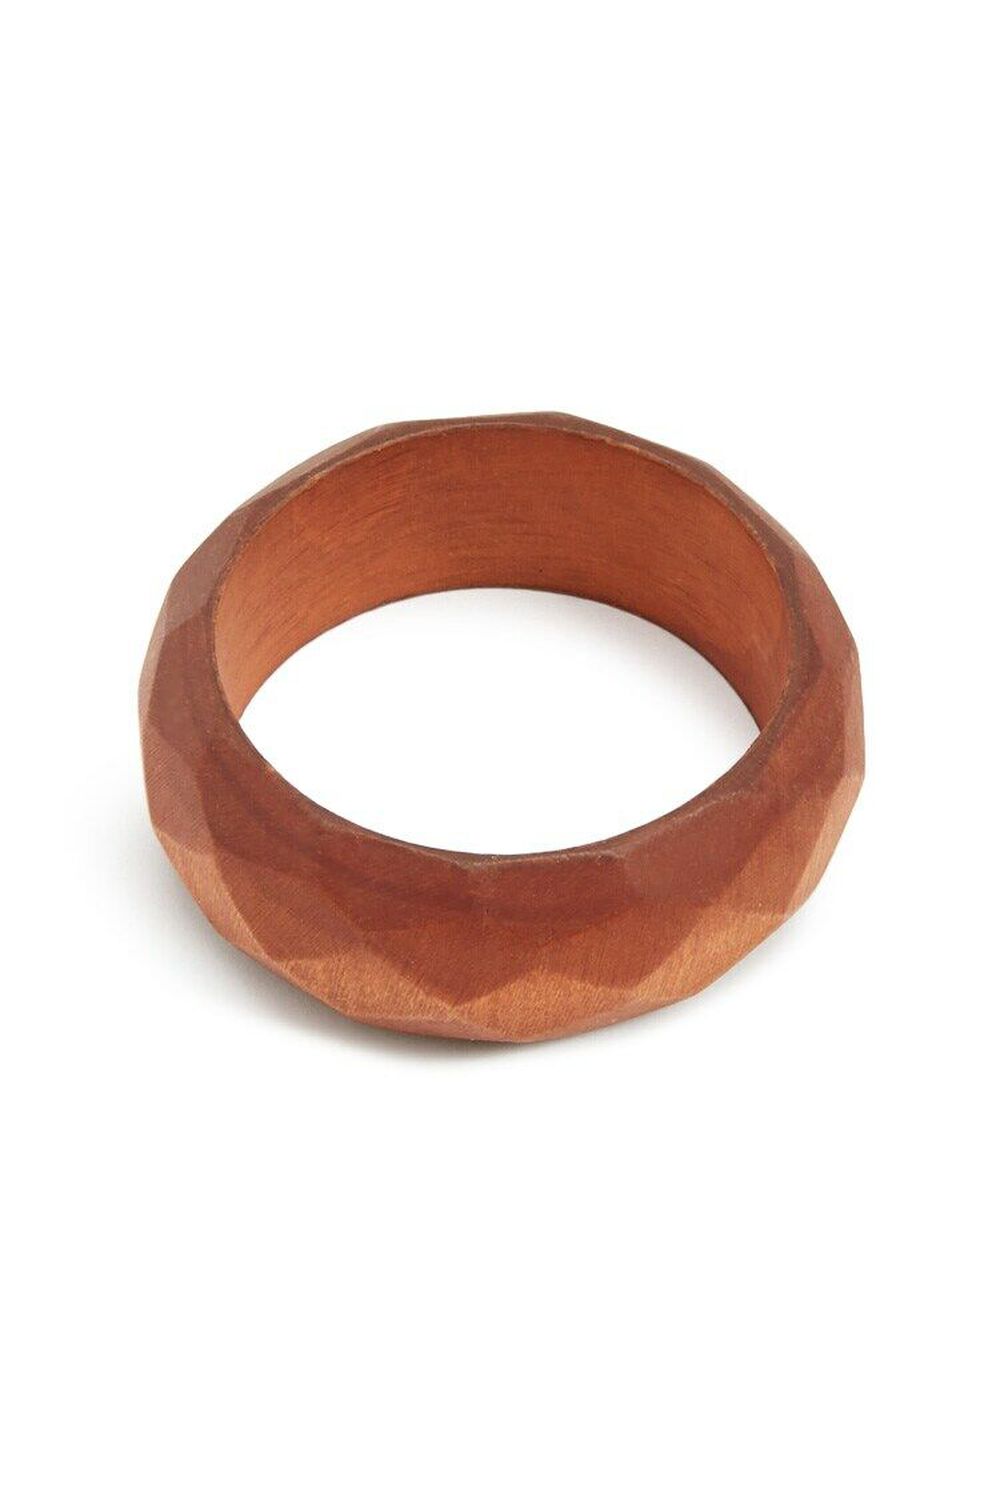 Etched Wooden Bangle, image 1